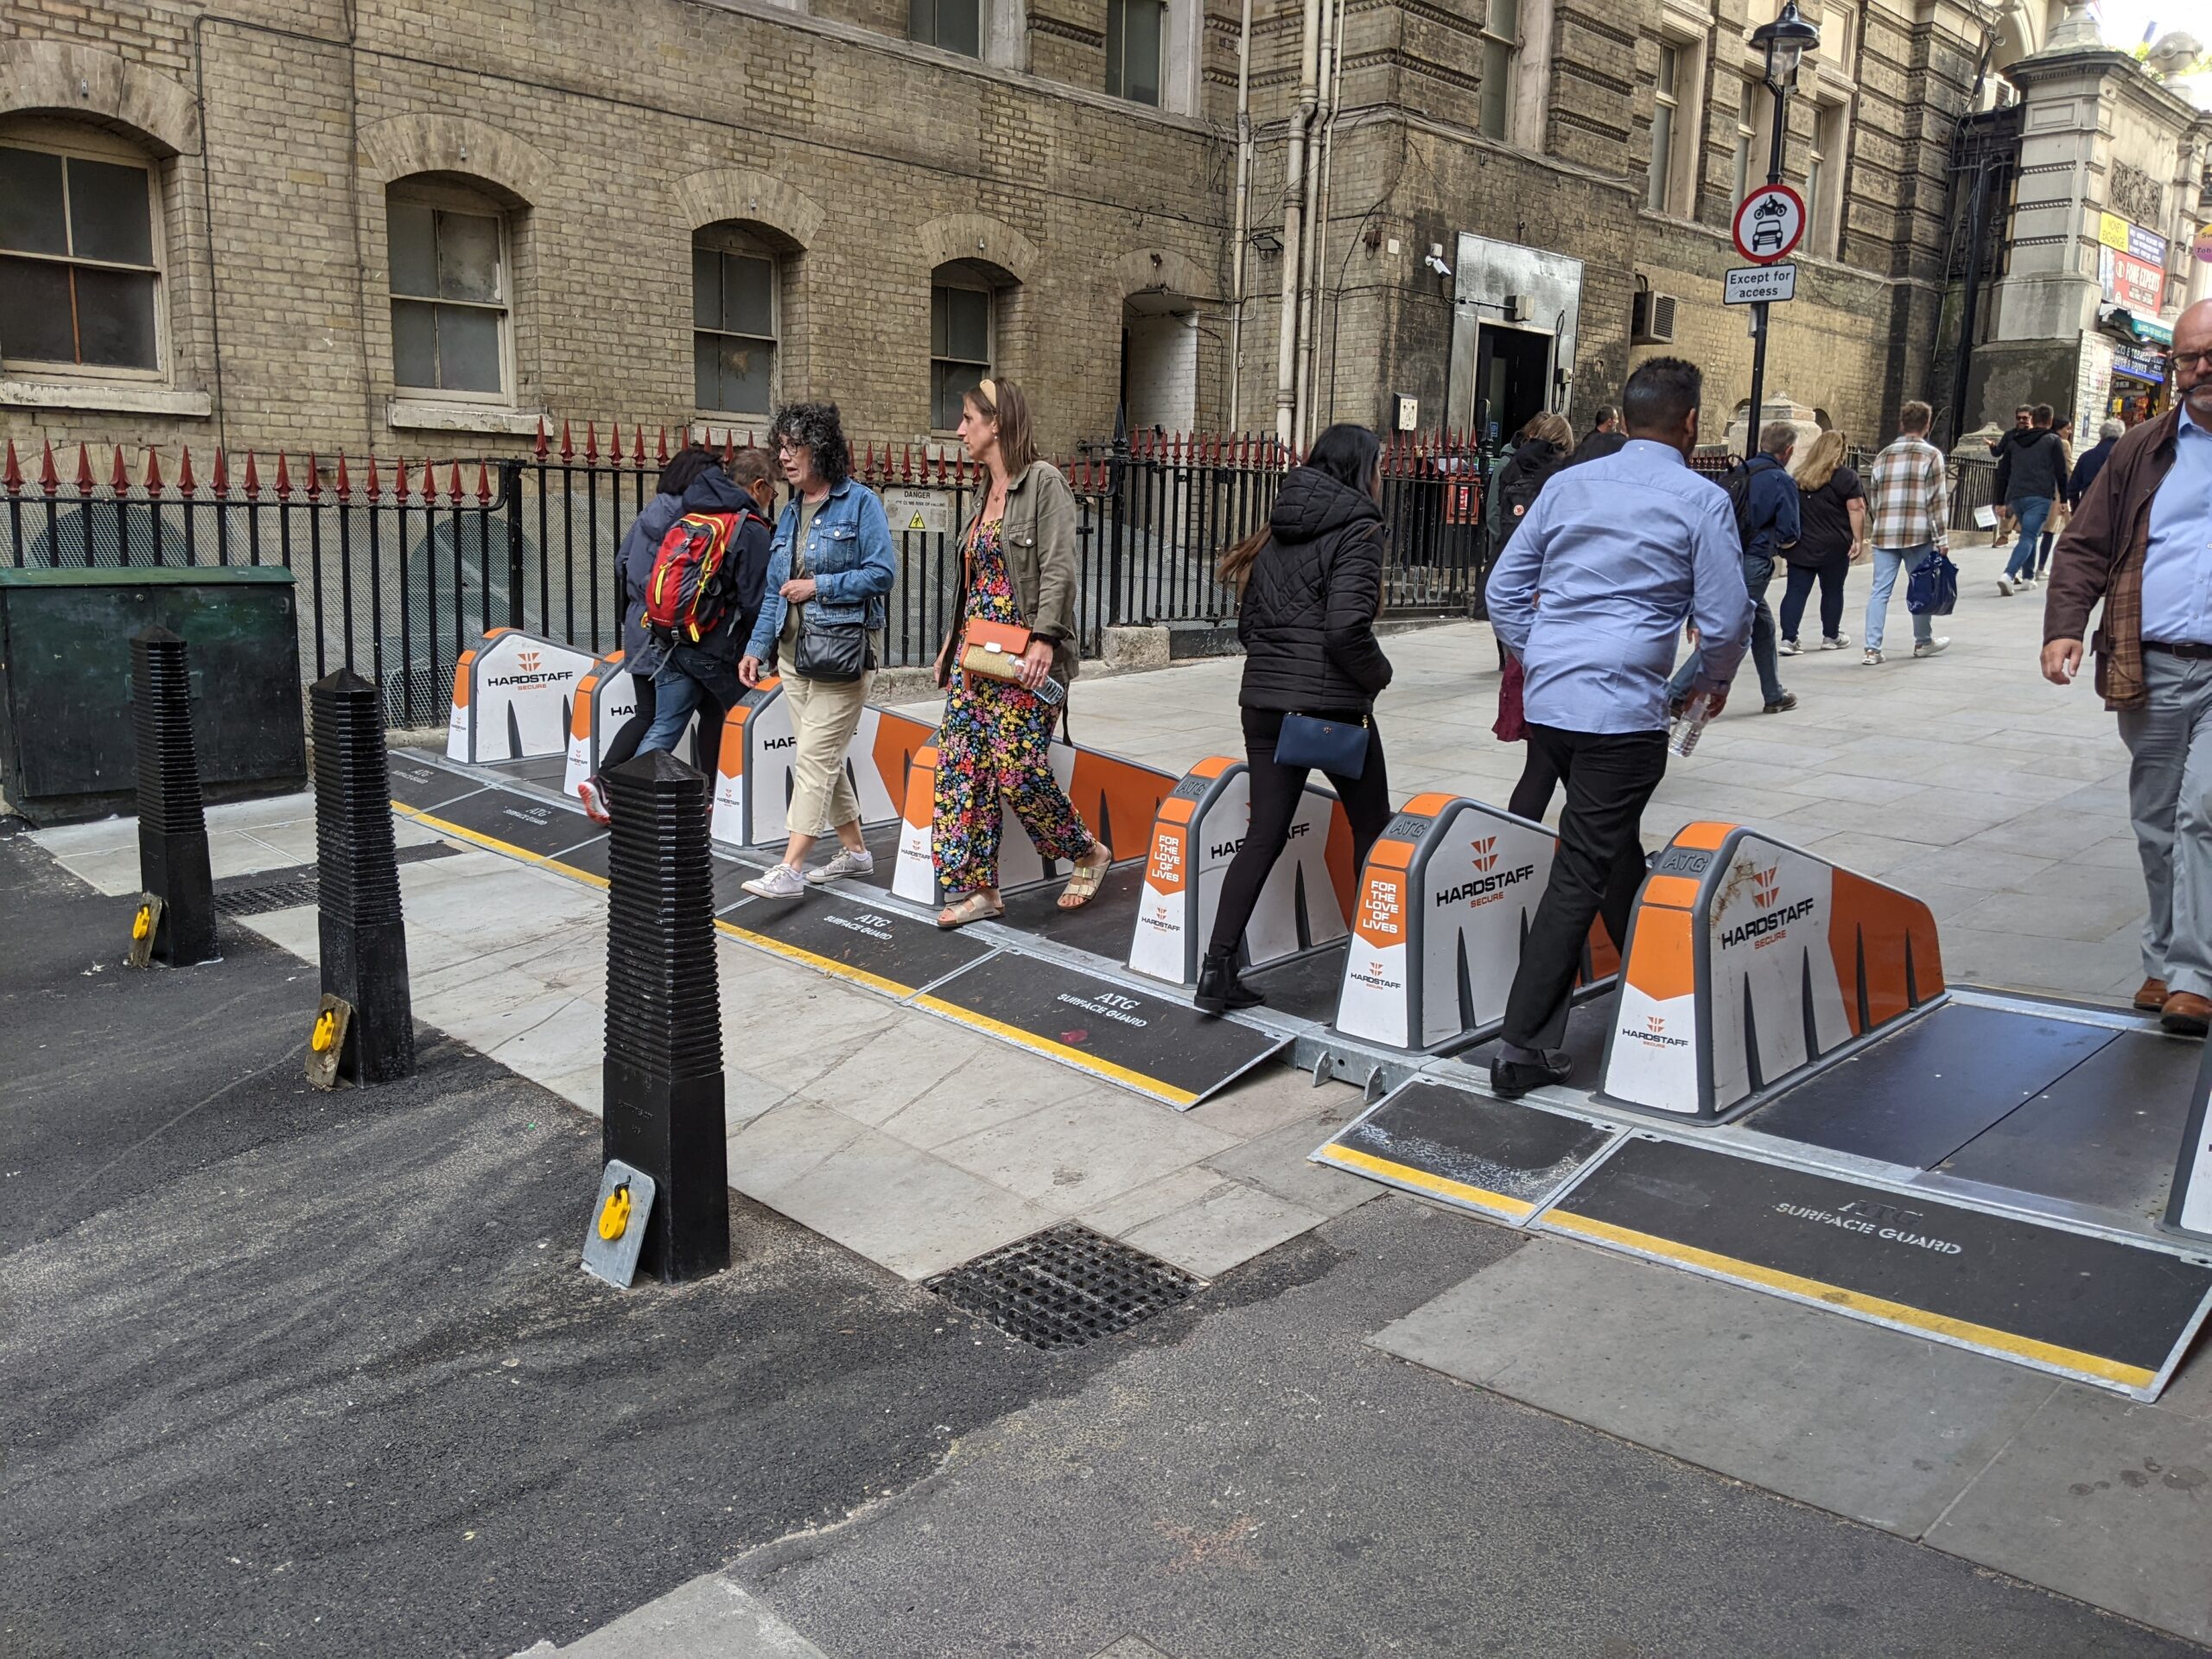 The image shows a London street that has been pedestrianised via bollards and a temporary barrier running the width of the street. People walk through the barrier, while in the background a road sign says 'except for access'. 